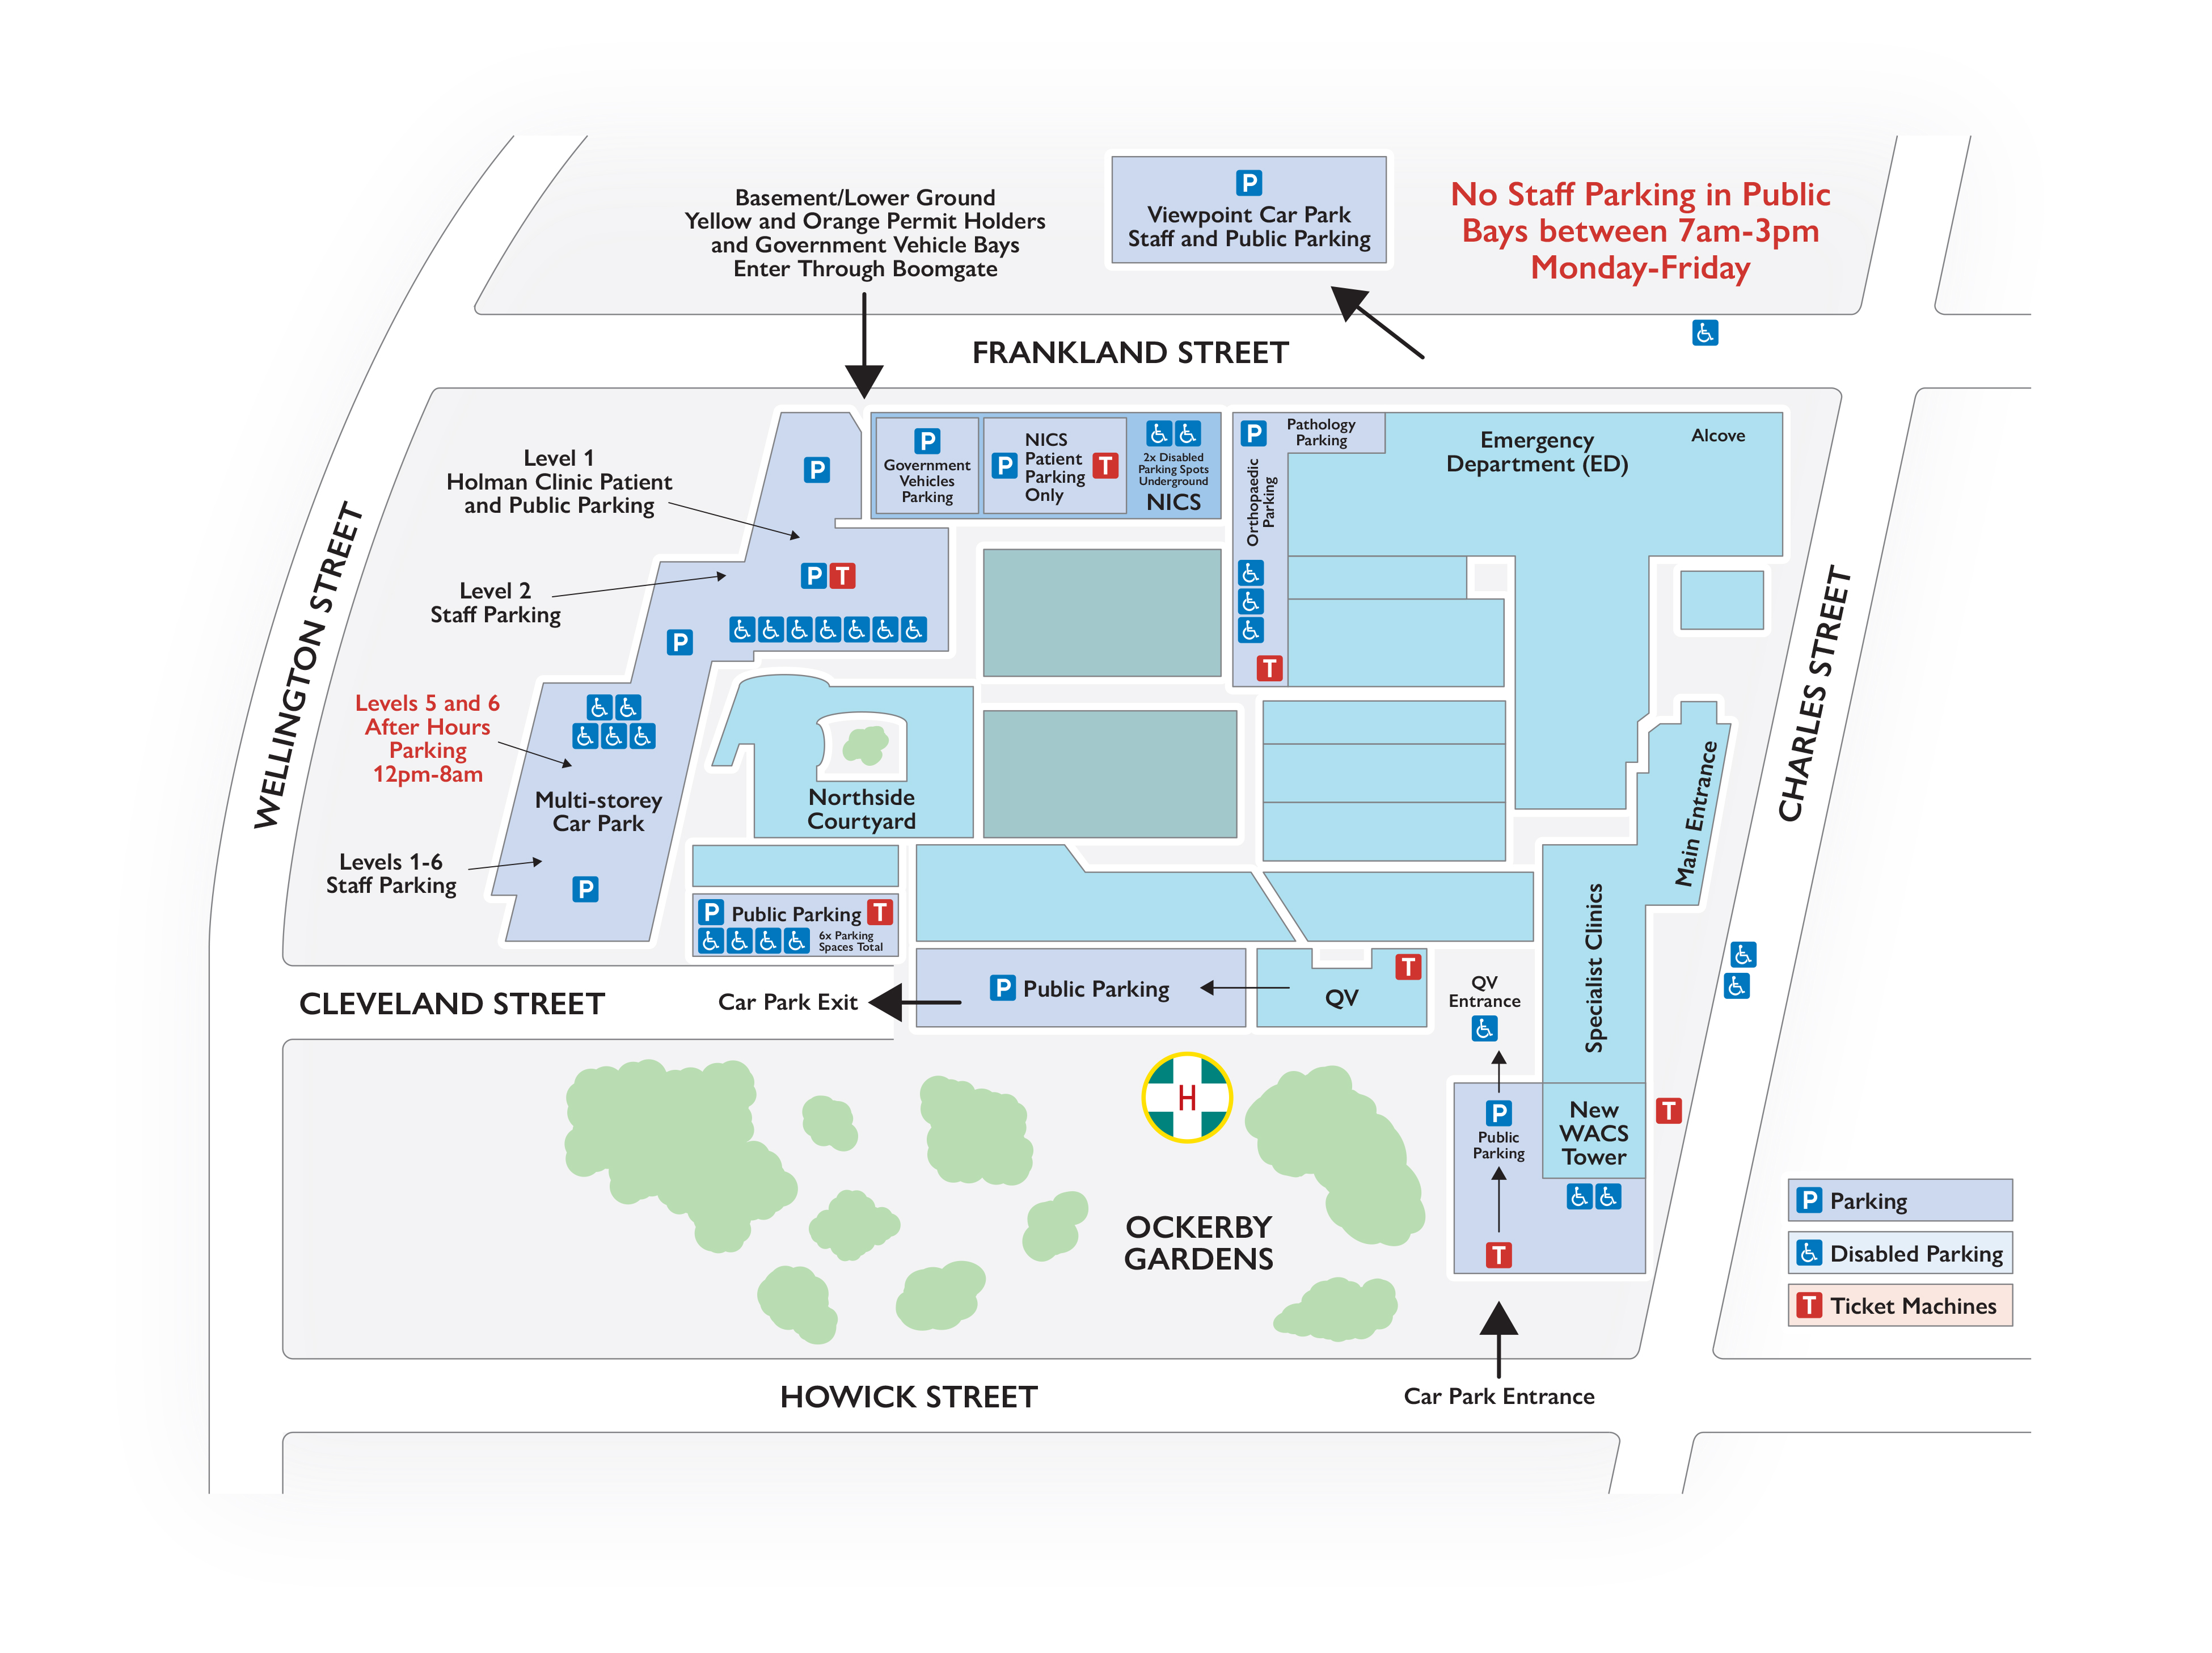 Launceston General Hospital Parking map. See page content for full image description, including parking locations.